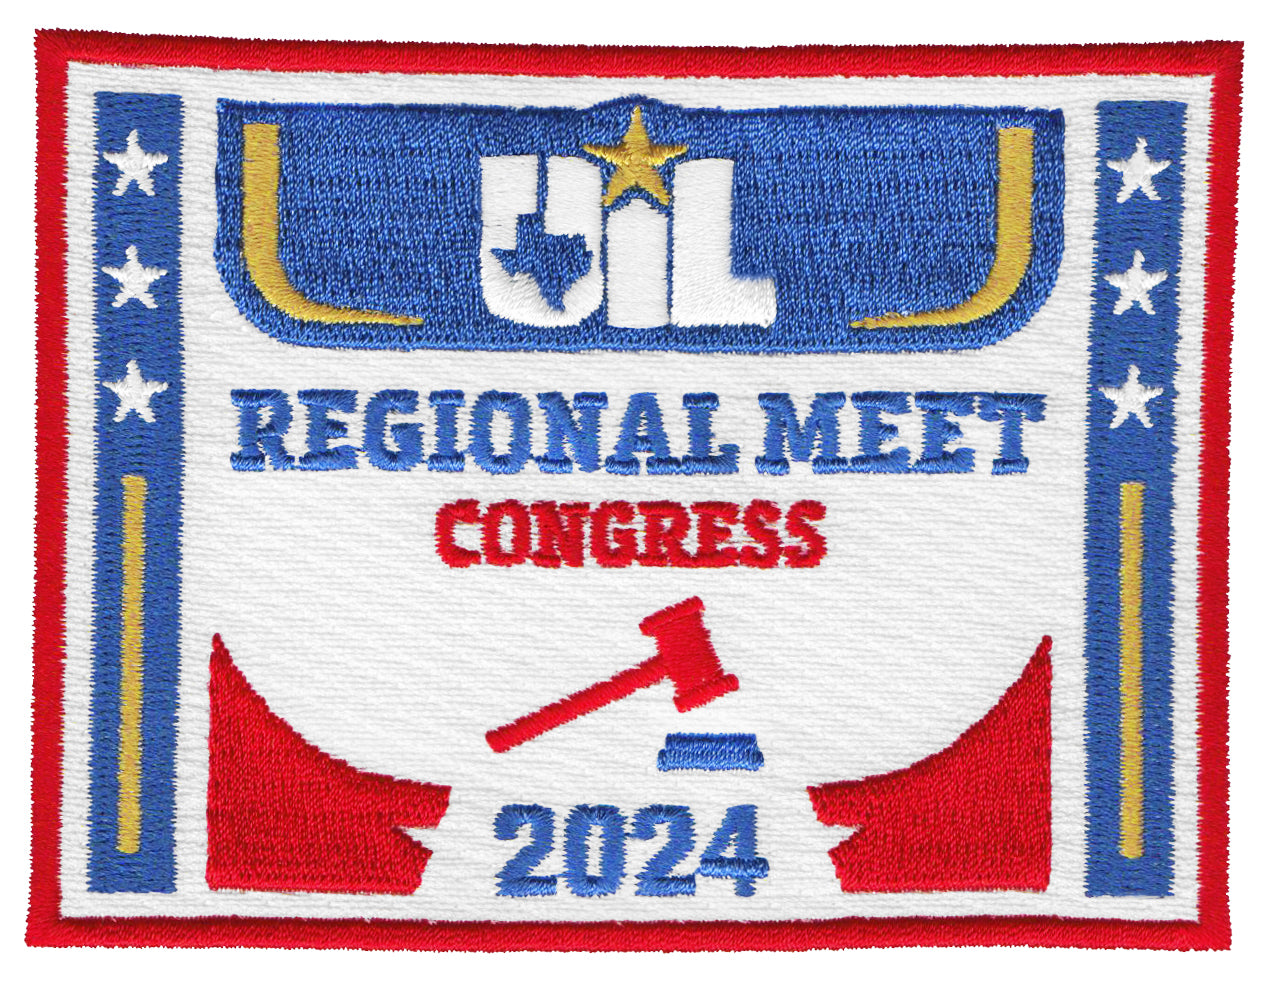 Congress State and Regional Patches